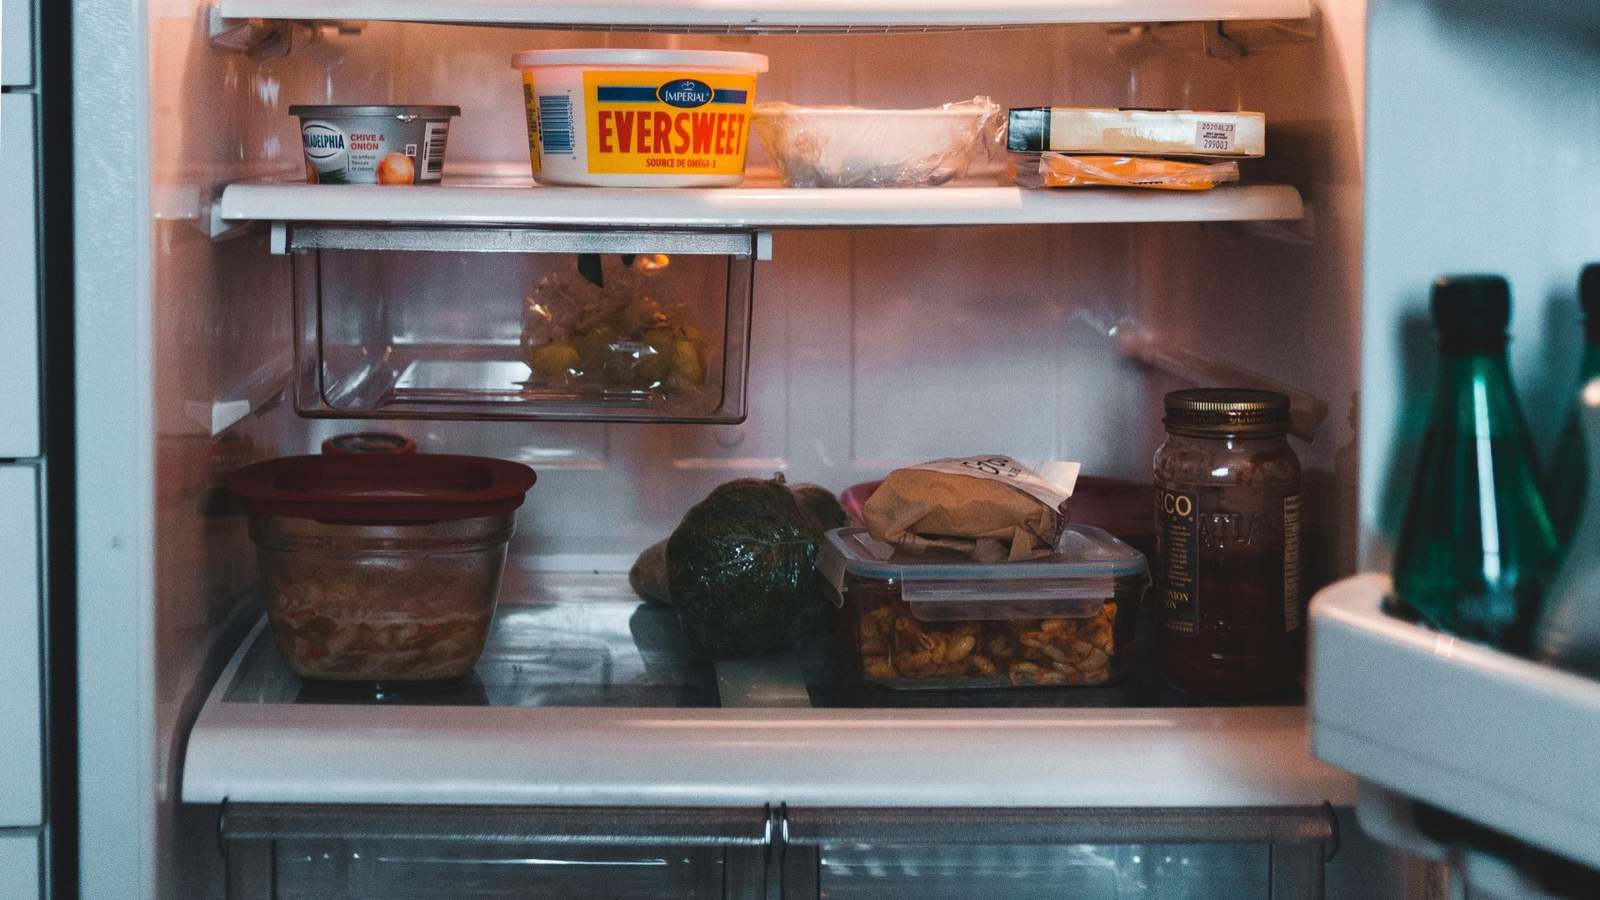 When was the last time you cleaned out your fridge?